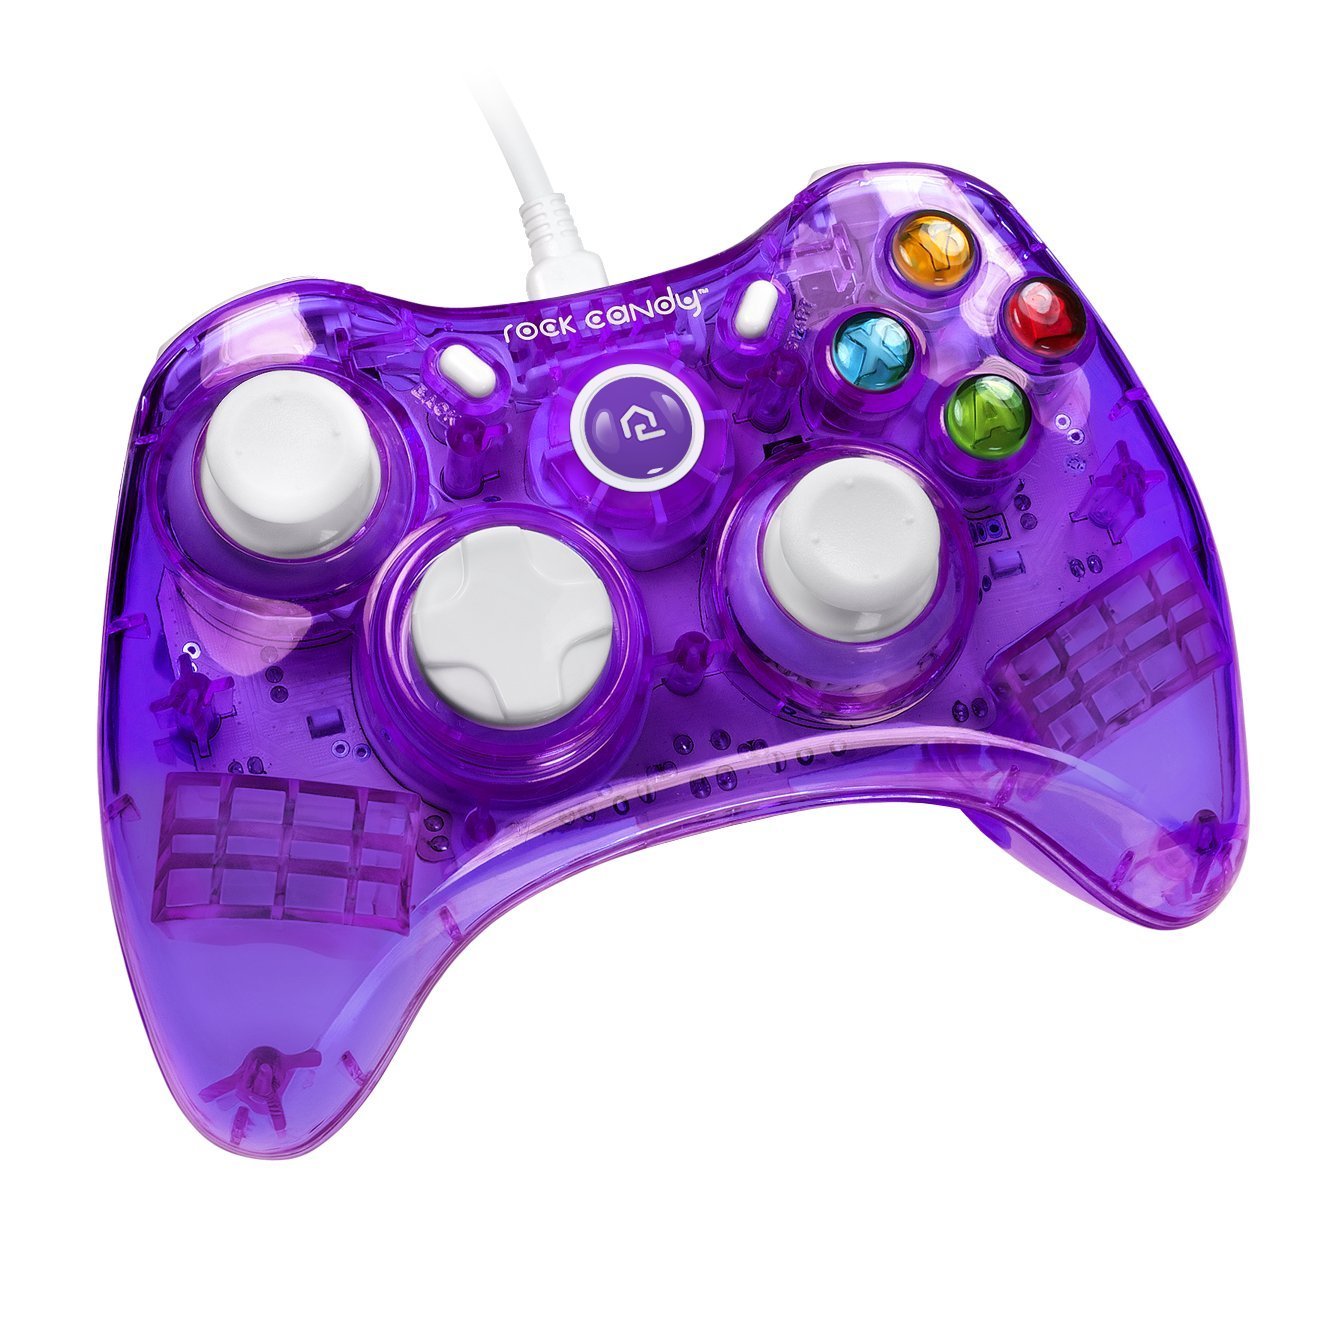 Rock candy controller pc